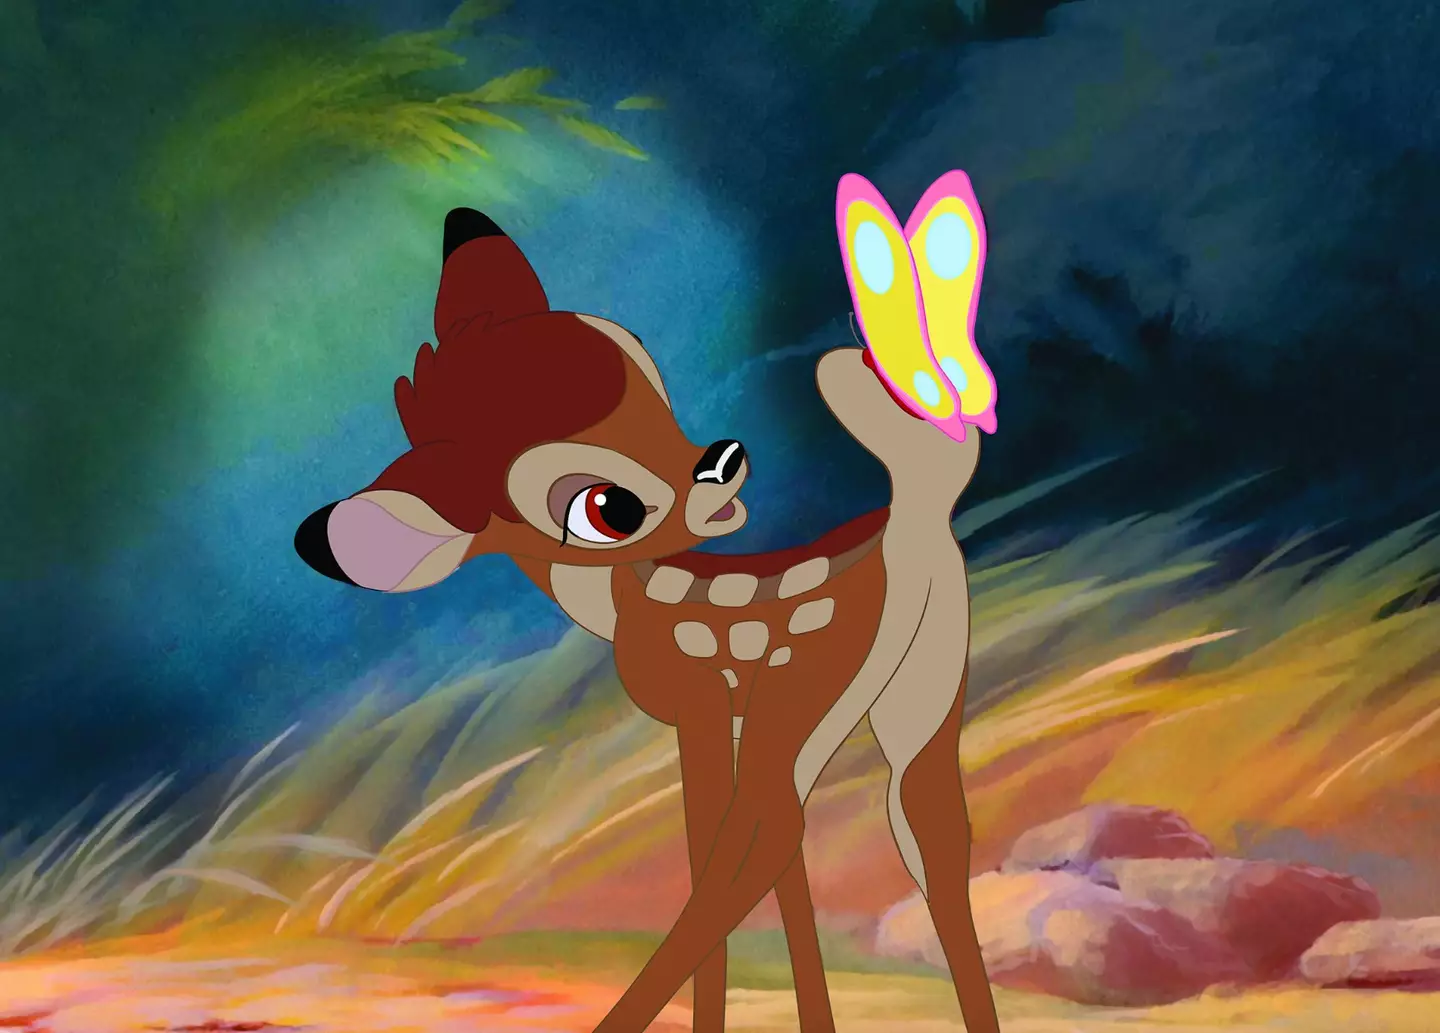 Bambi is next on the list to get the slasher treatment.